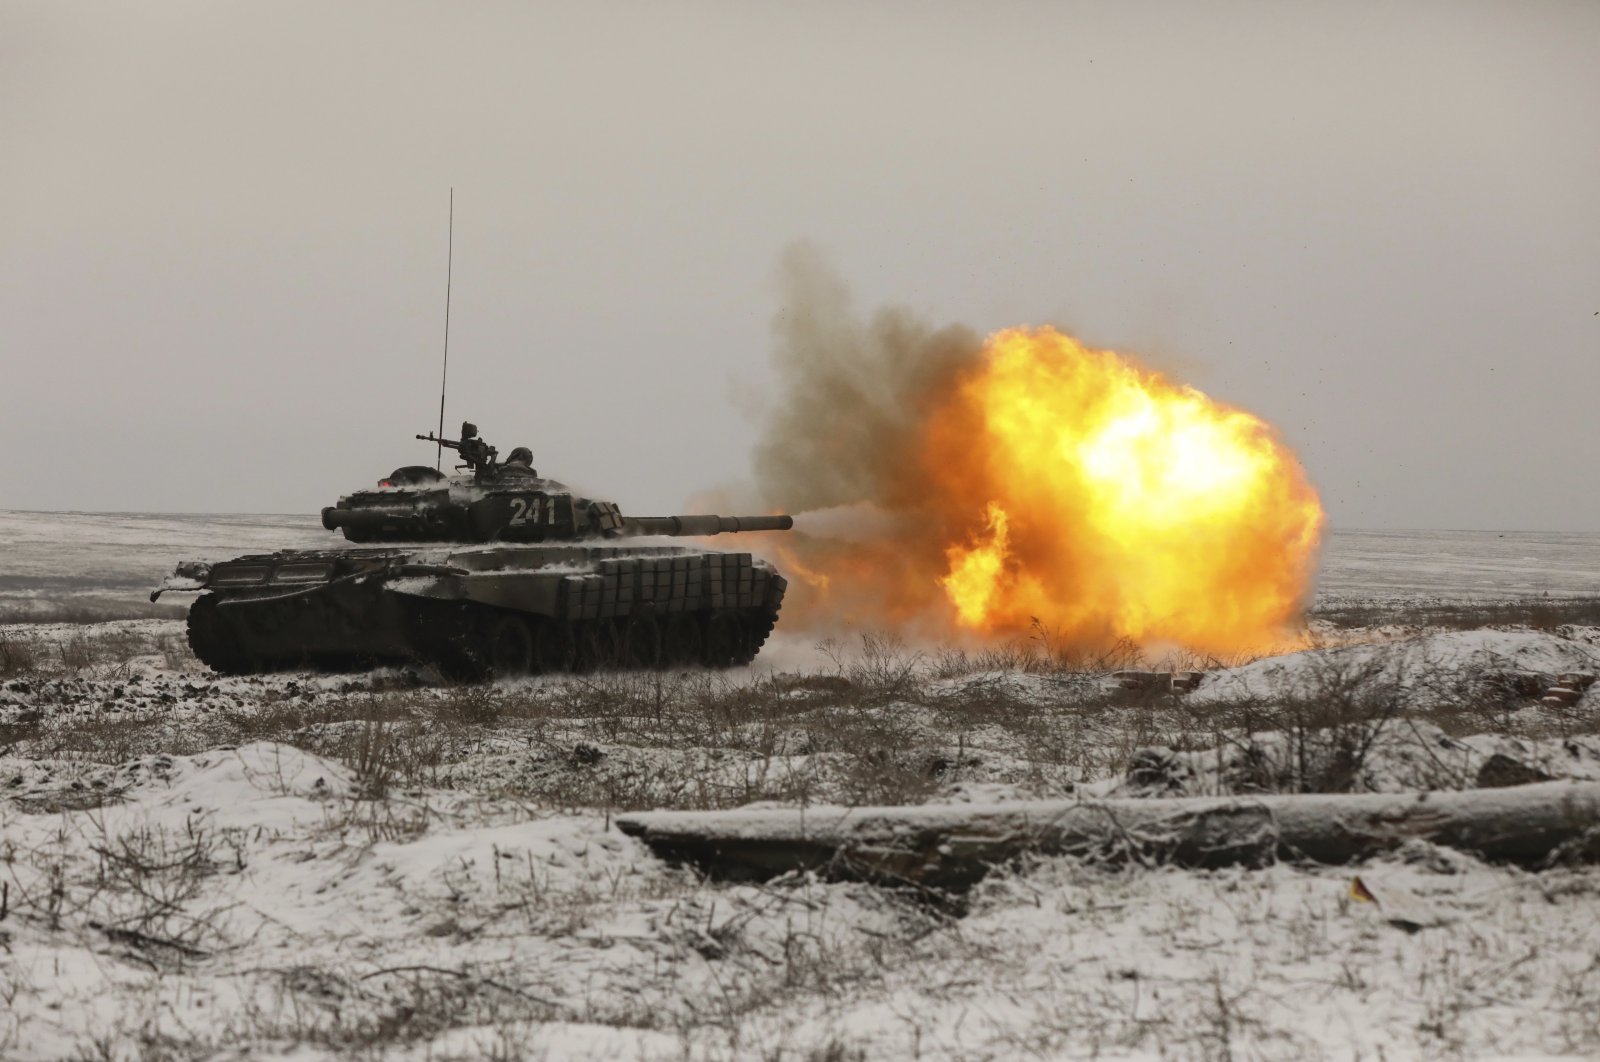 A Russian tank T-72B3 fires as troops take part in drills at the Kadamovskiy firing range in the Rostov region in southern Russia, Wednesday, Jan. 12, 2022. (AP Photo)